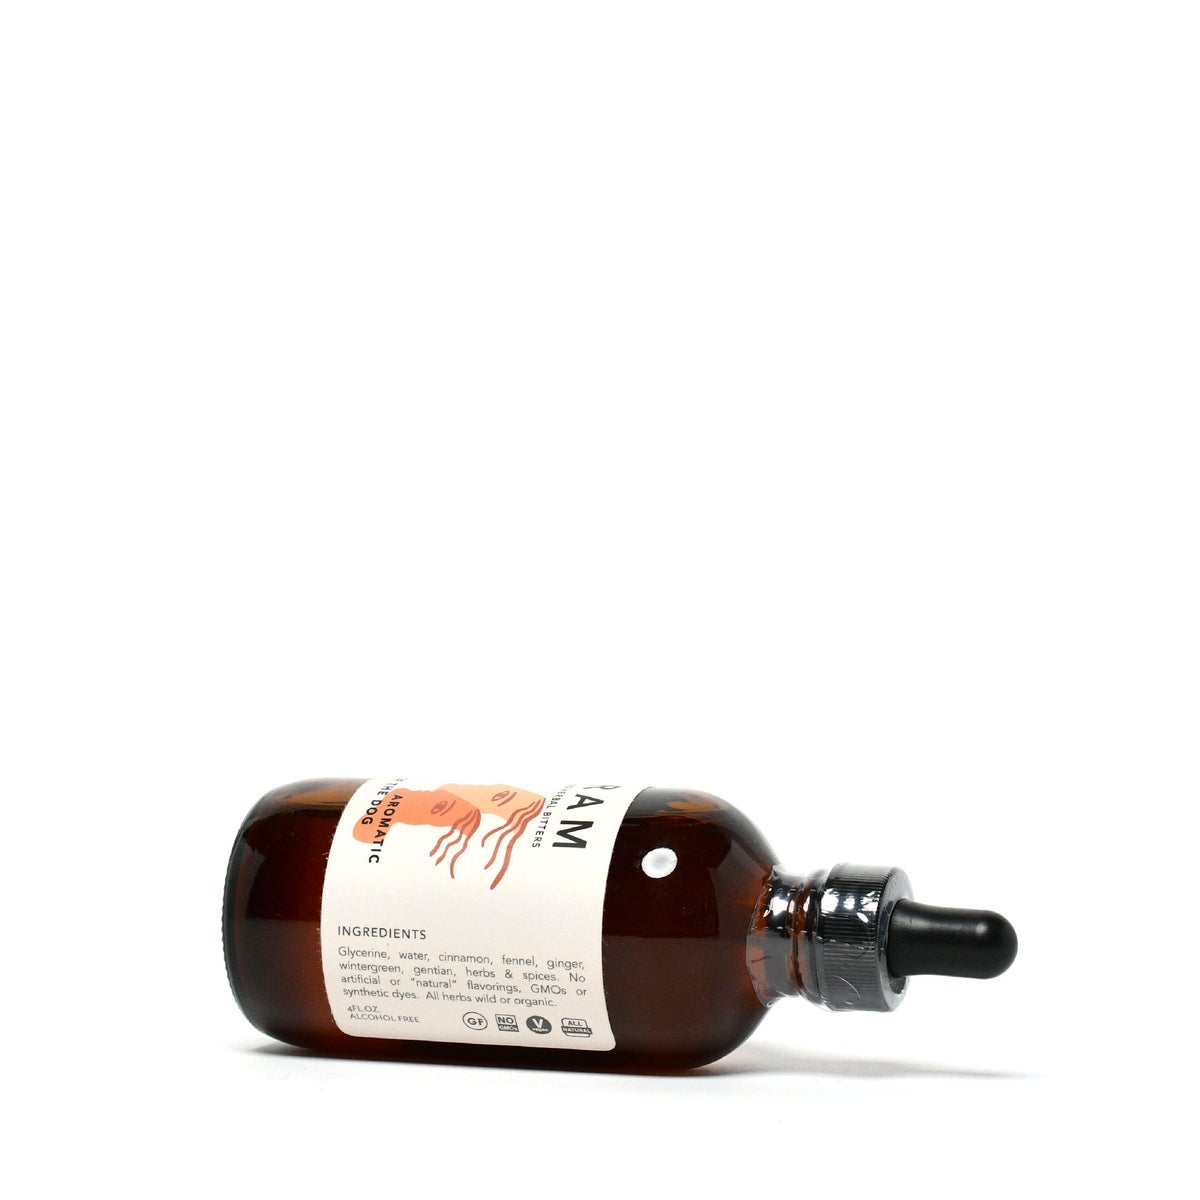 DRAM - HAIR OF THE DOG BITTERS